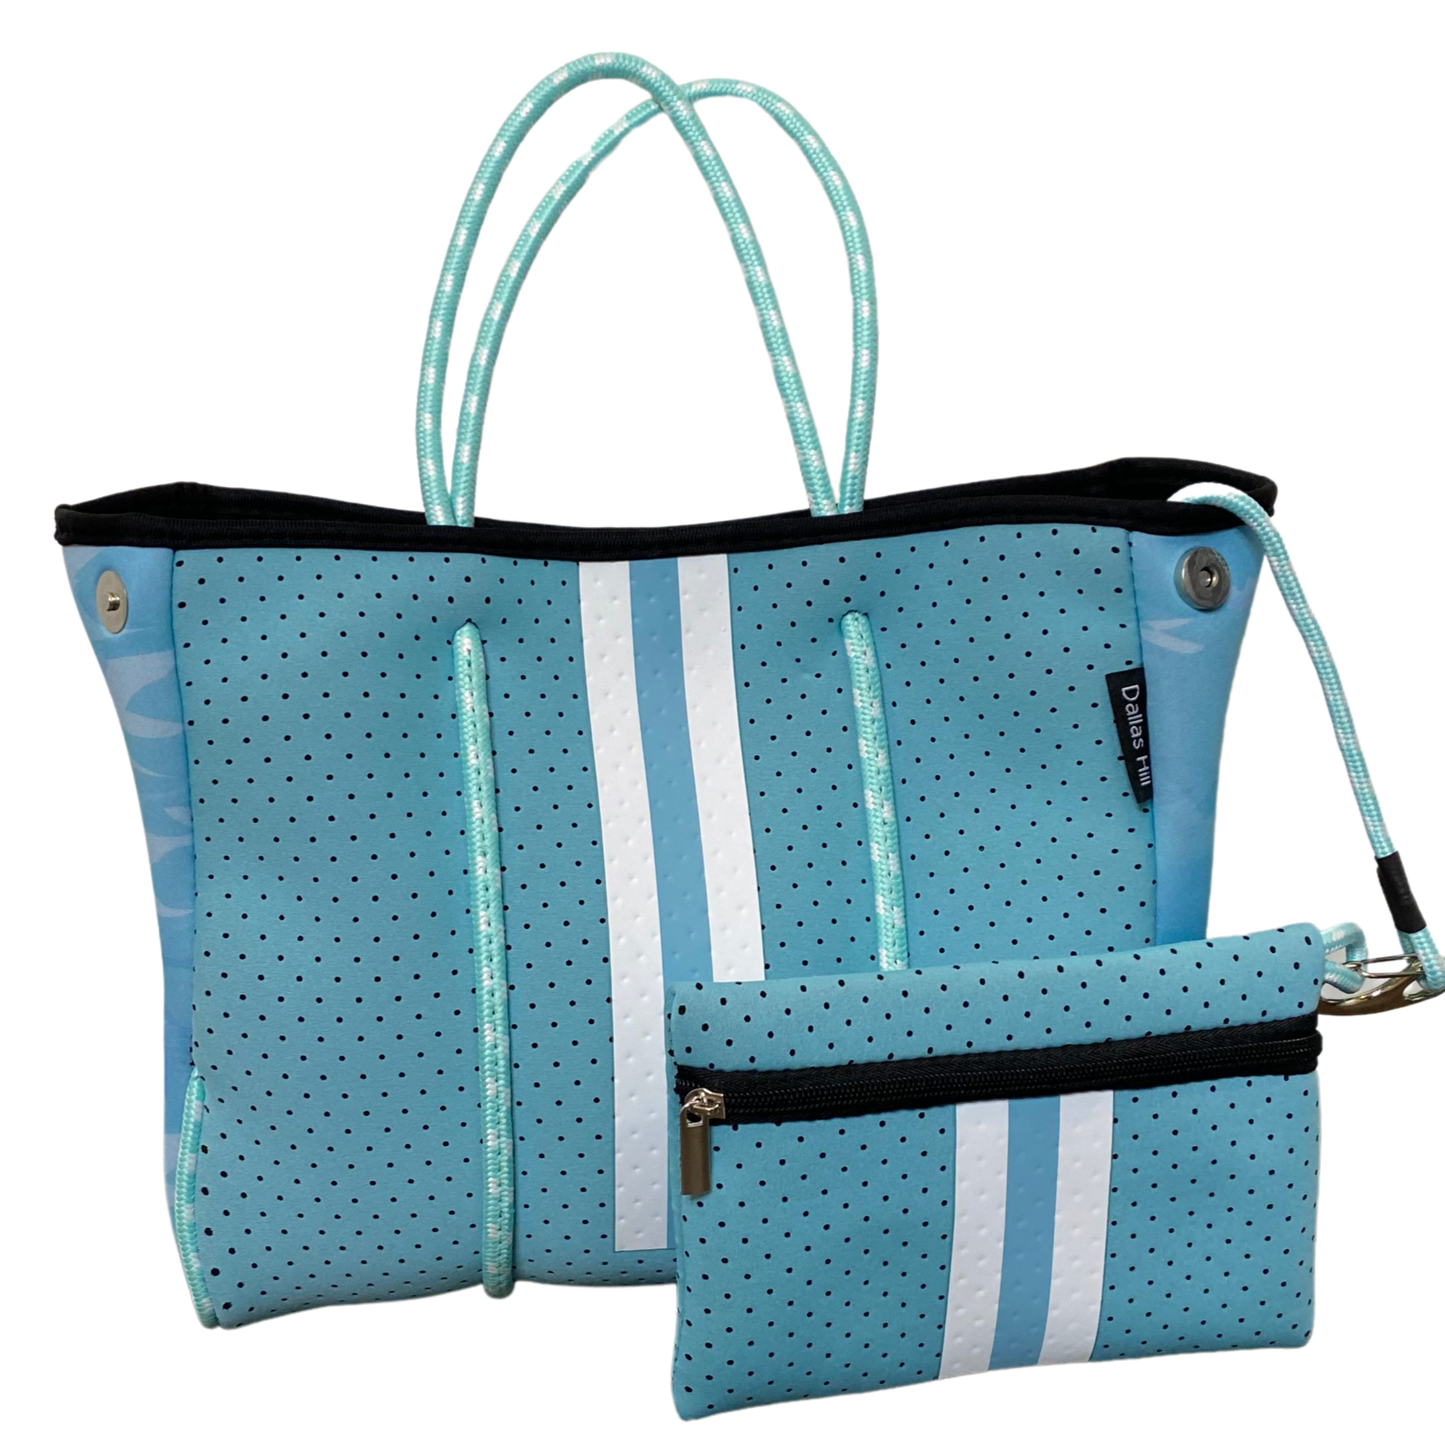 Neoprene Tote Bag Kids & Tween Sized Blue & Camo sides by Dallas Hill Design